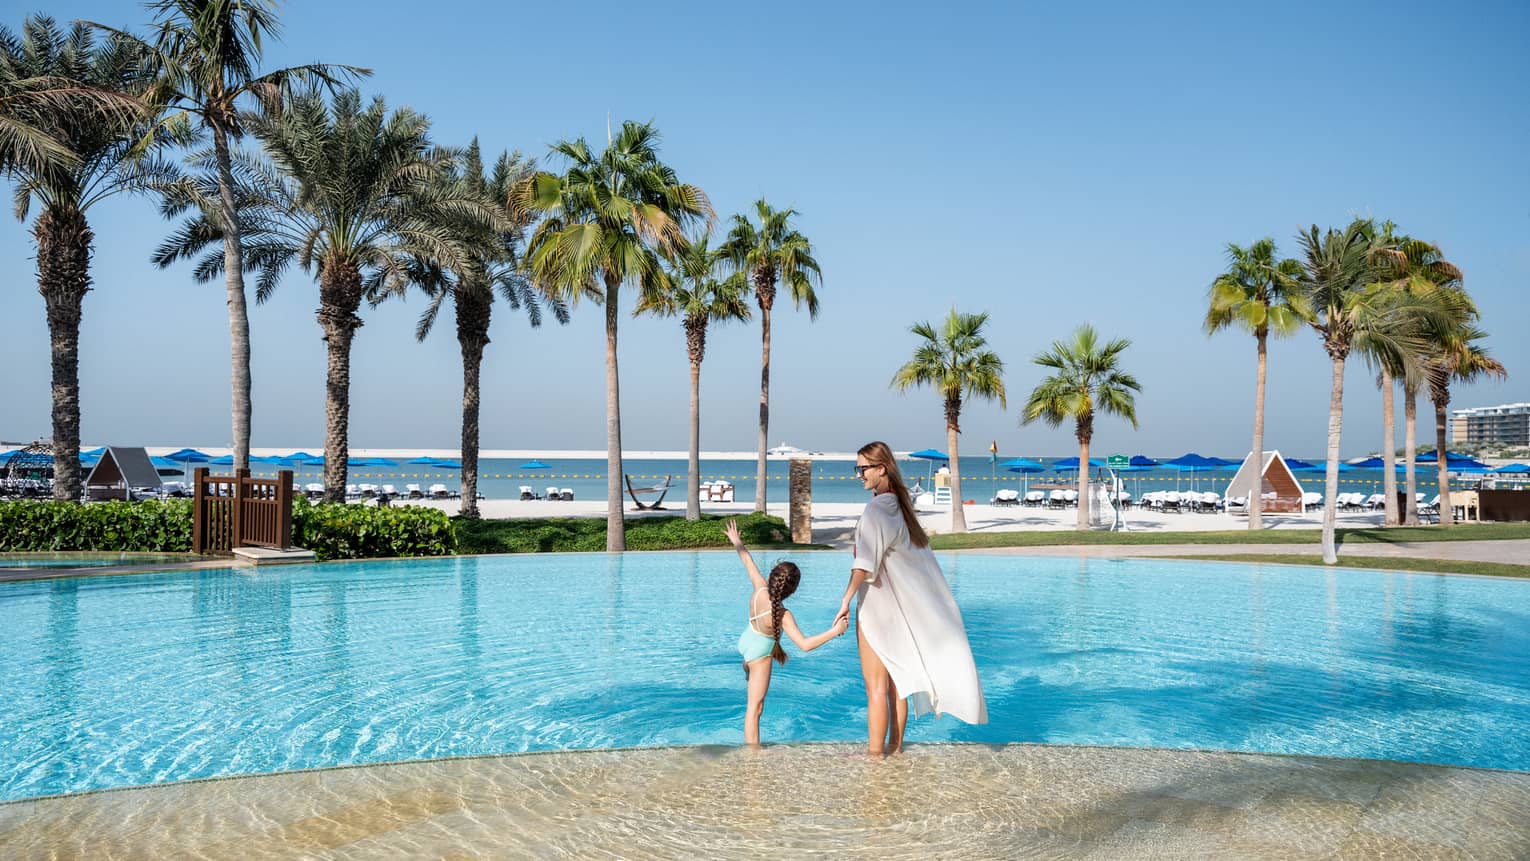 A woman and a little girl hold hands while wading in the outdoor pool overlooking the Arabian Gulf